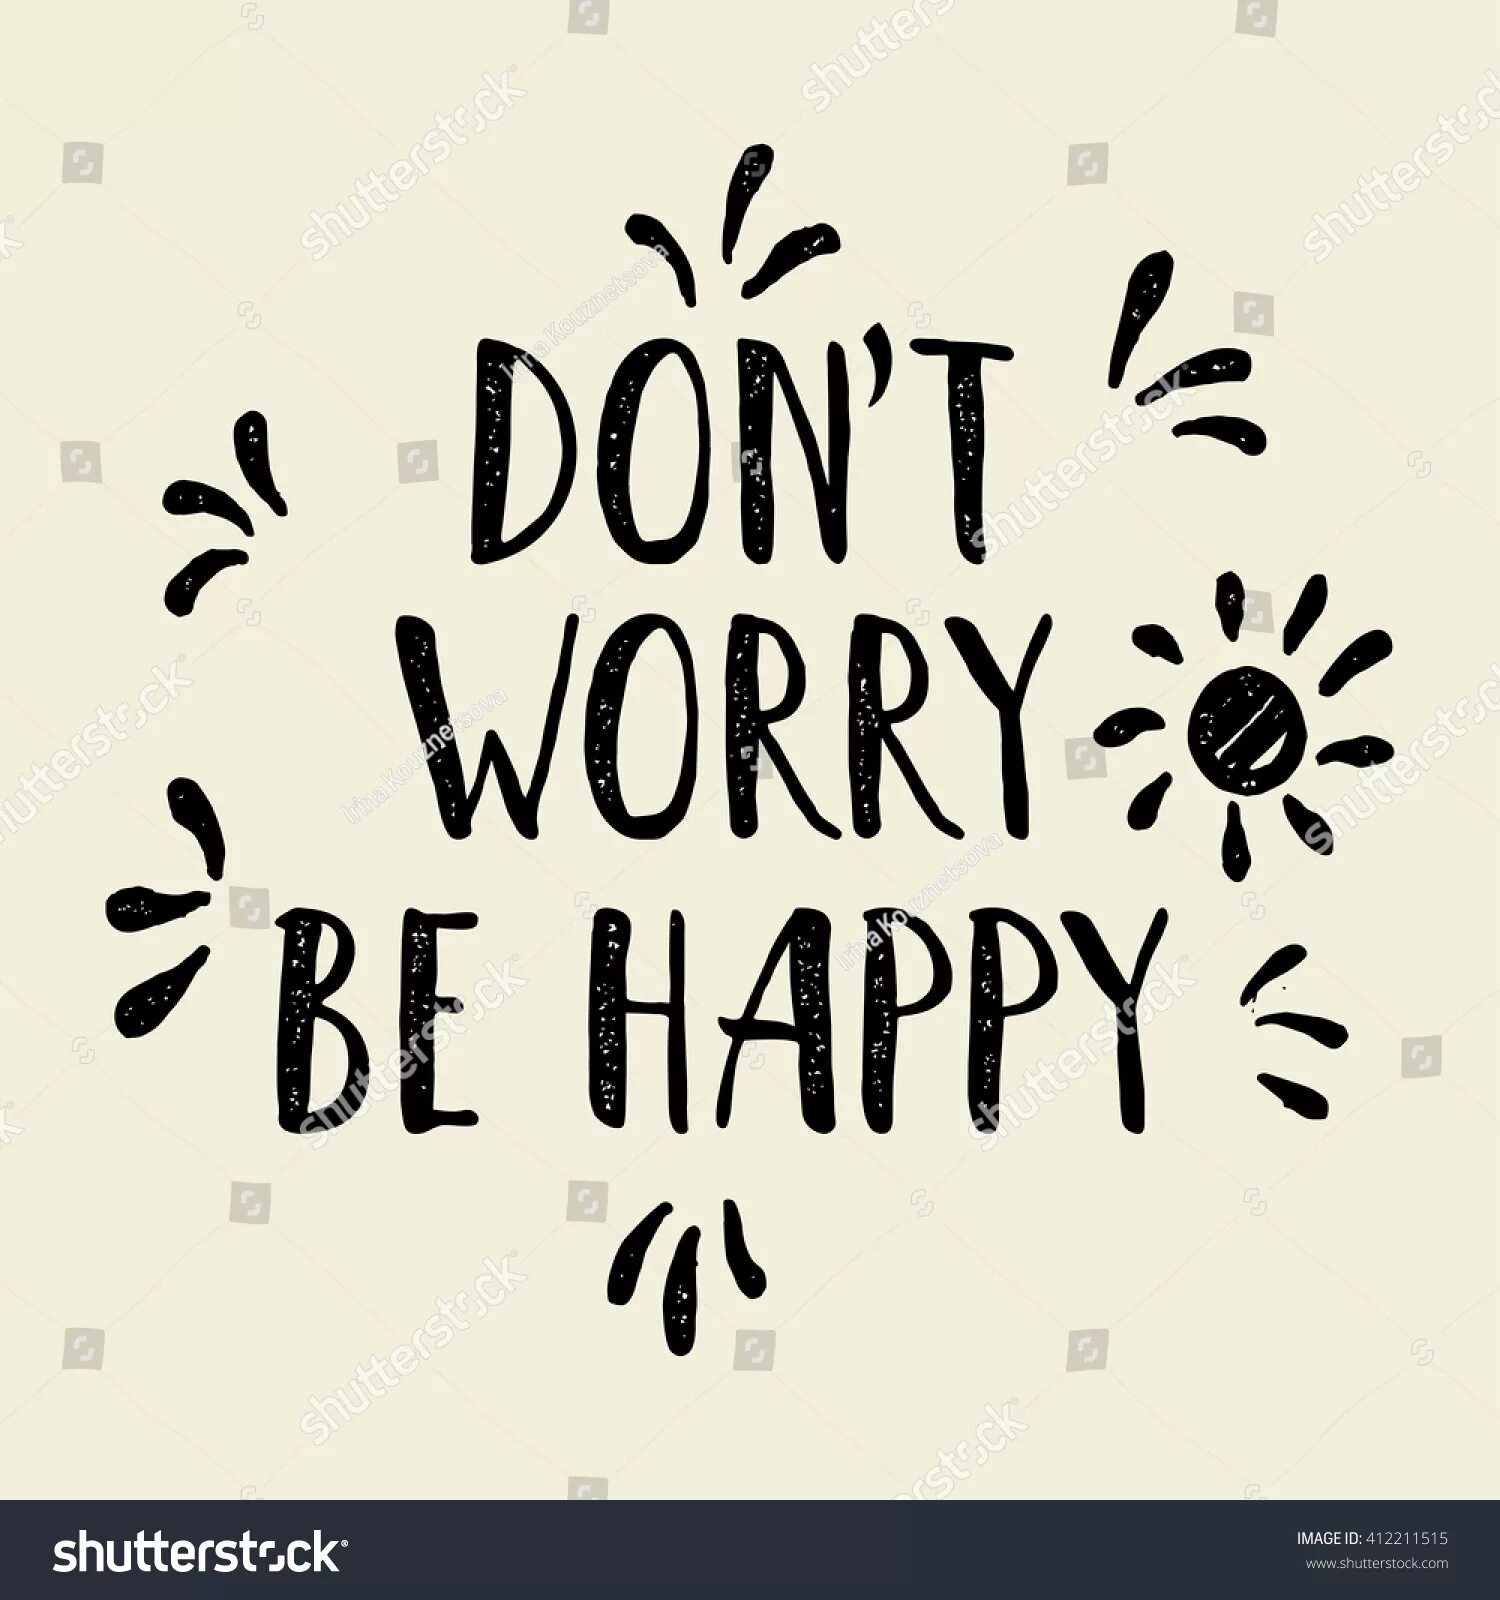 Dont happy. Don't worry be Happy. Надпись don't worry be Happy. Don't worry be Happy леттеринг. Don't worry be Happy картинки.